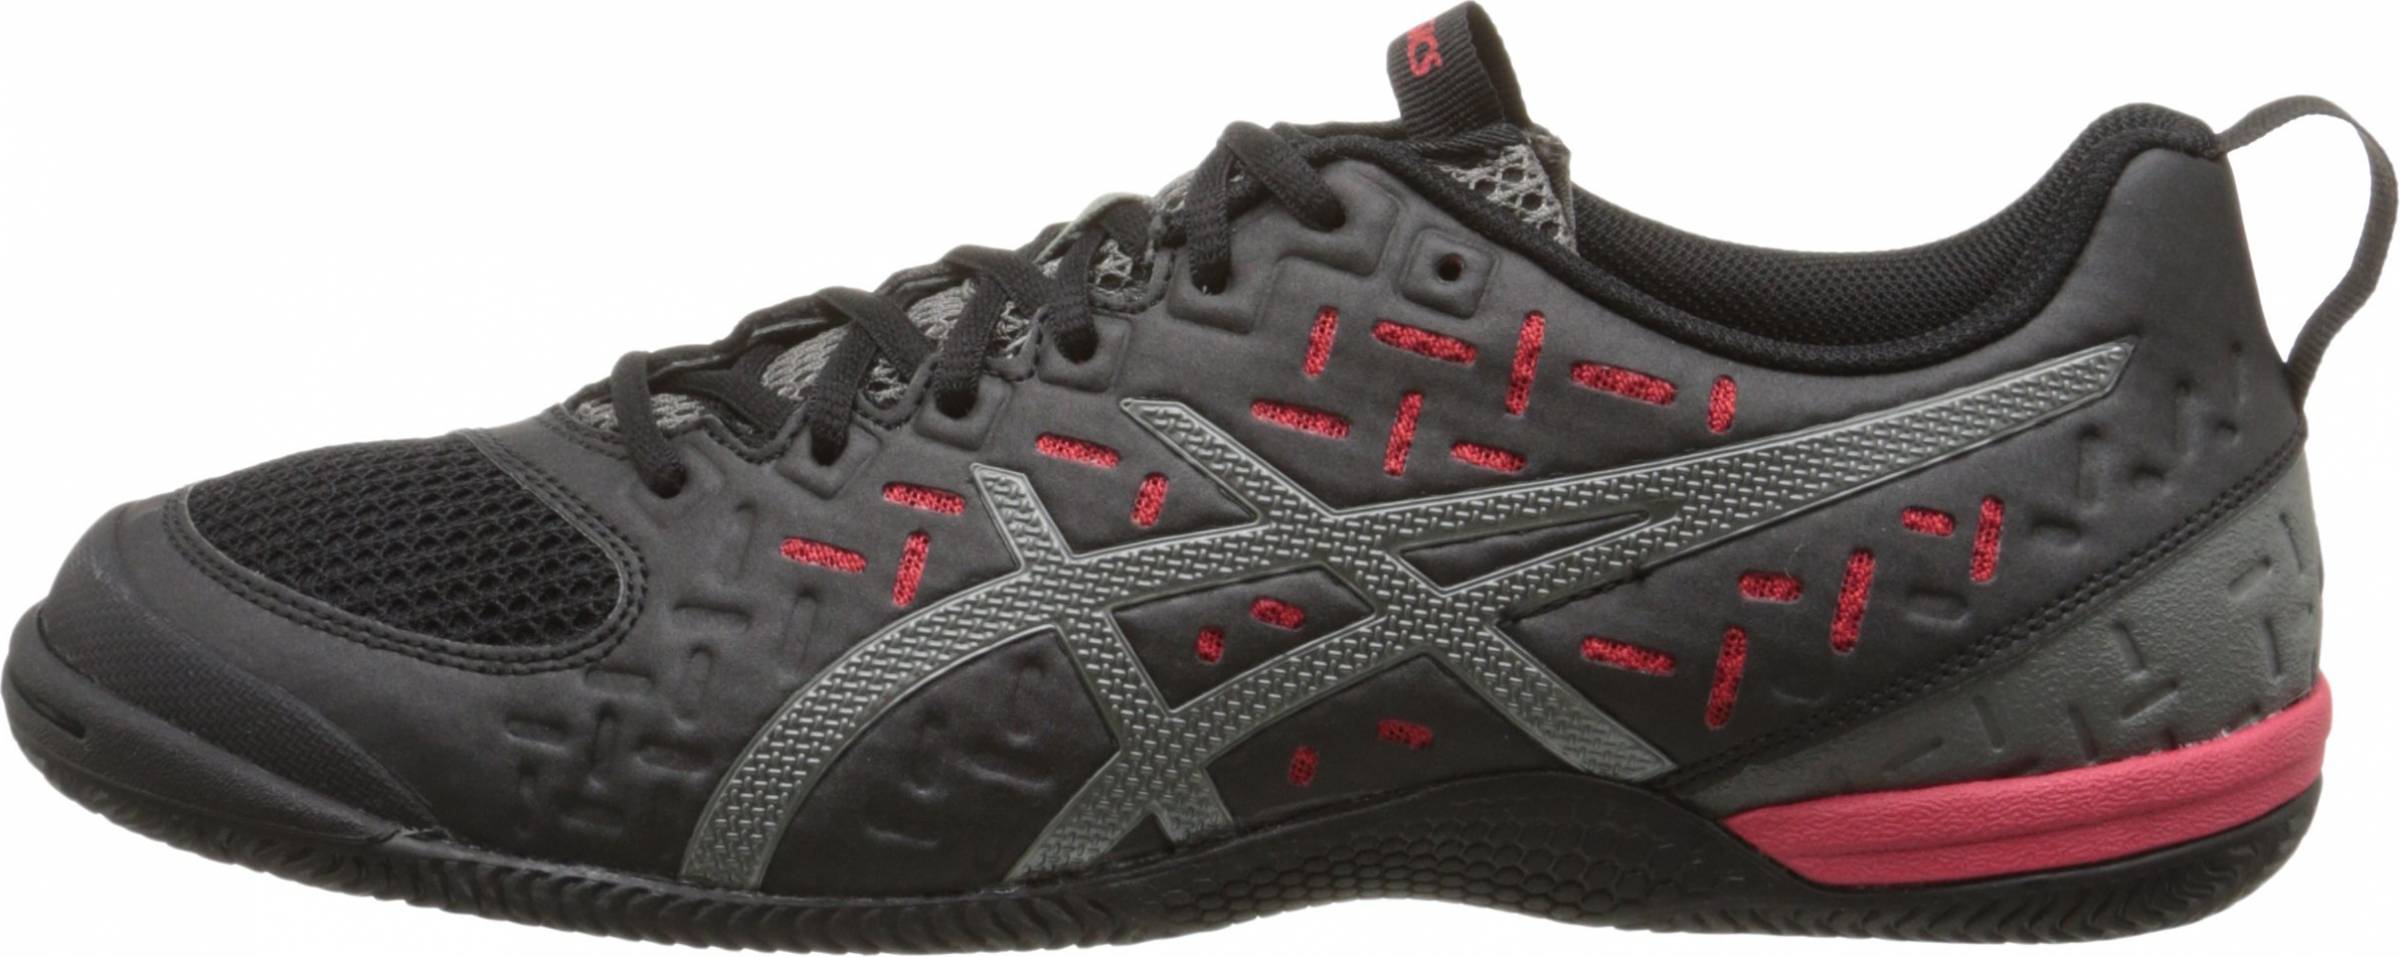 $100 + Review of Asics Gel Fortius 2 TR 